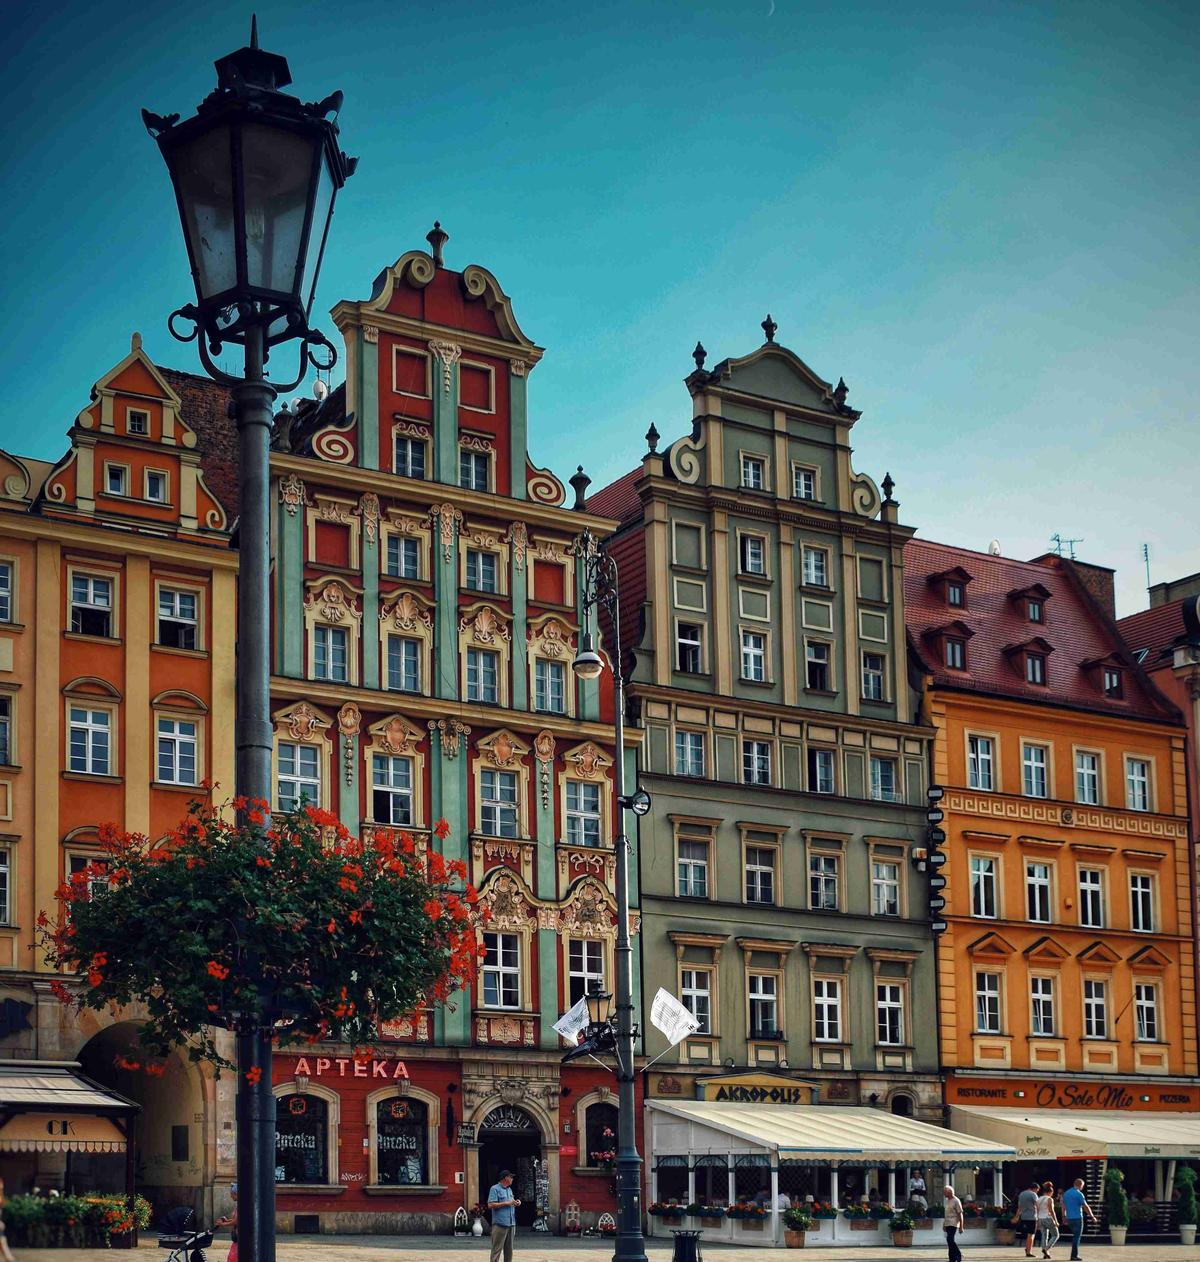 Colorful Historic Buildings on European Square